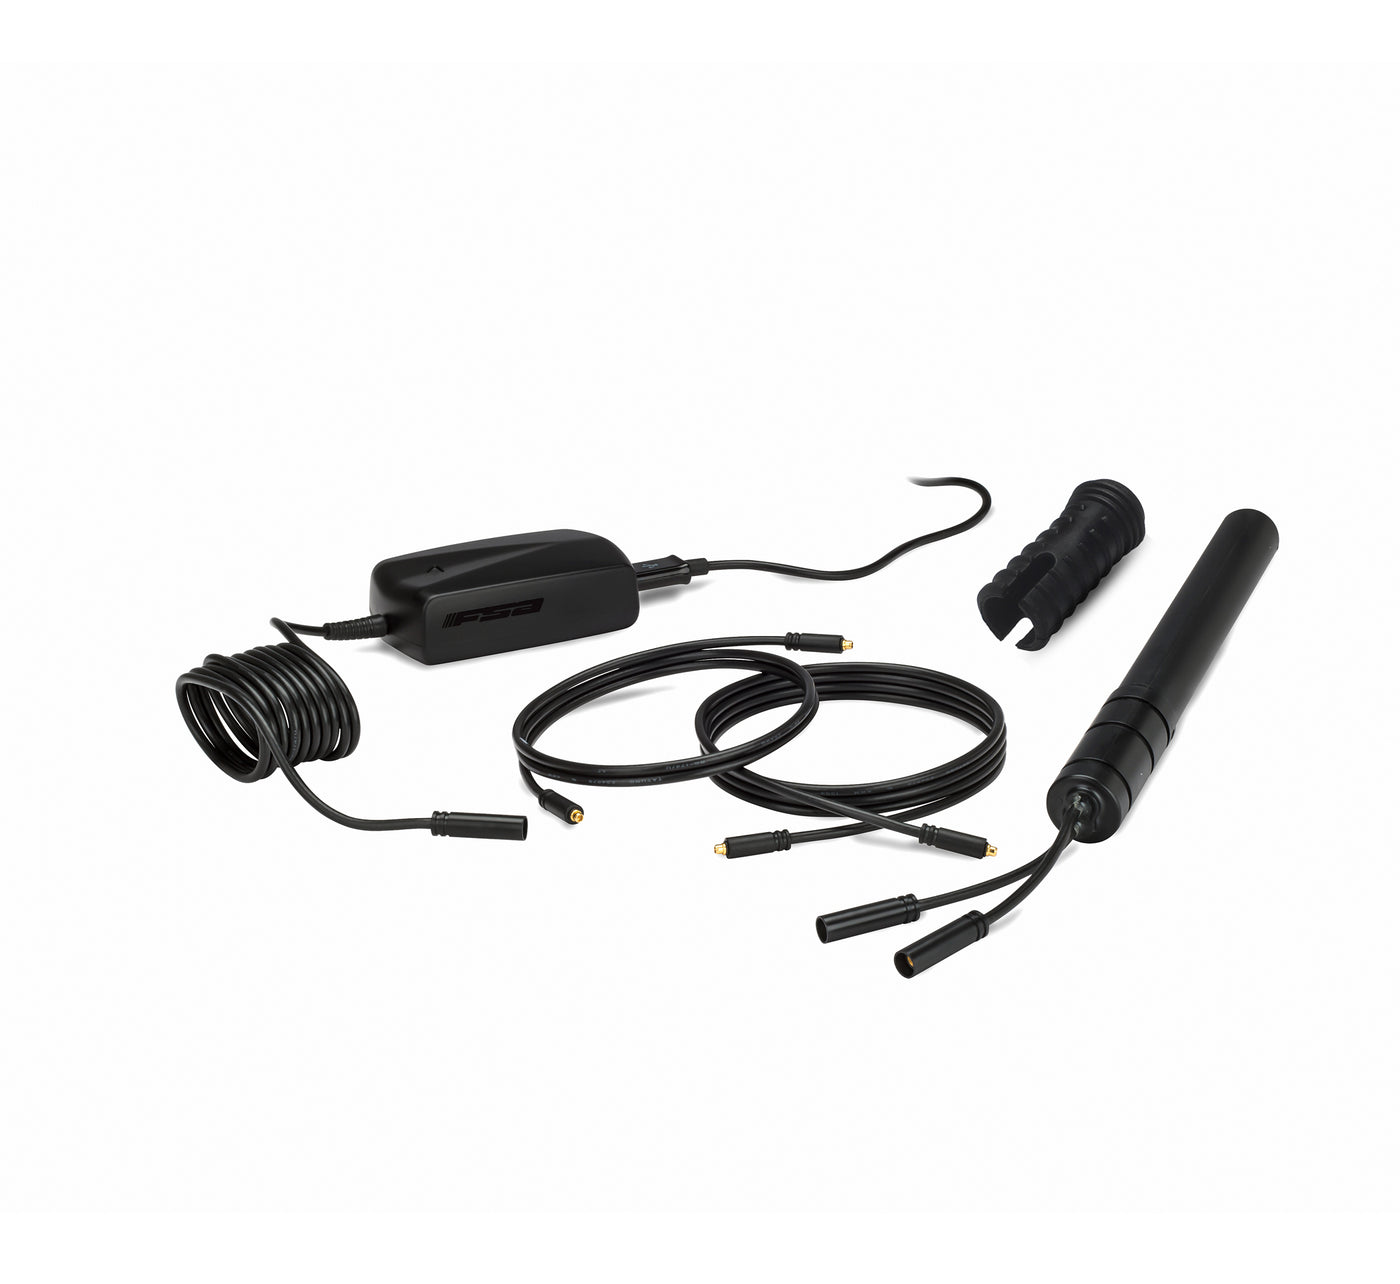 K-Force WE Battery, Charger, Sleeve, Cable Set